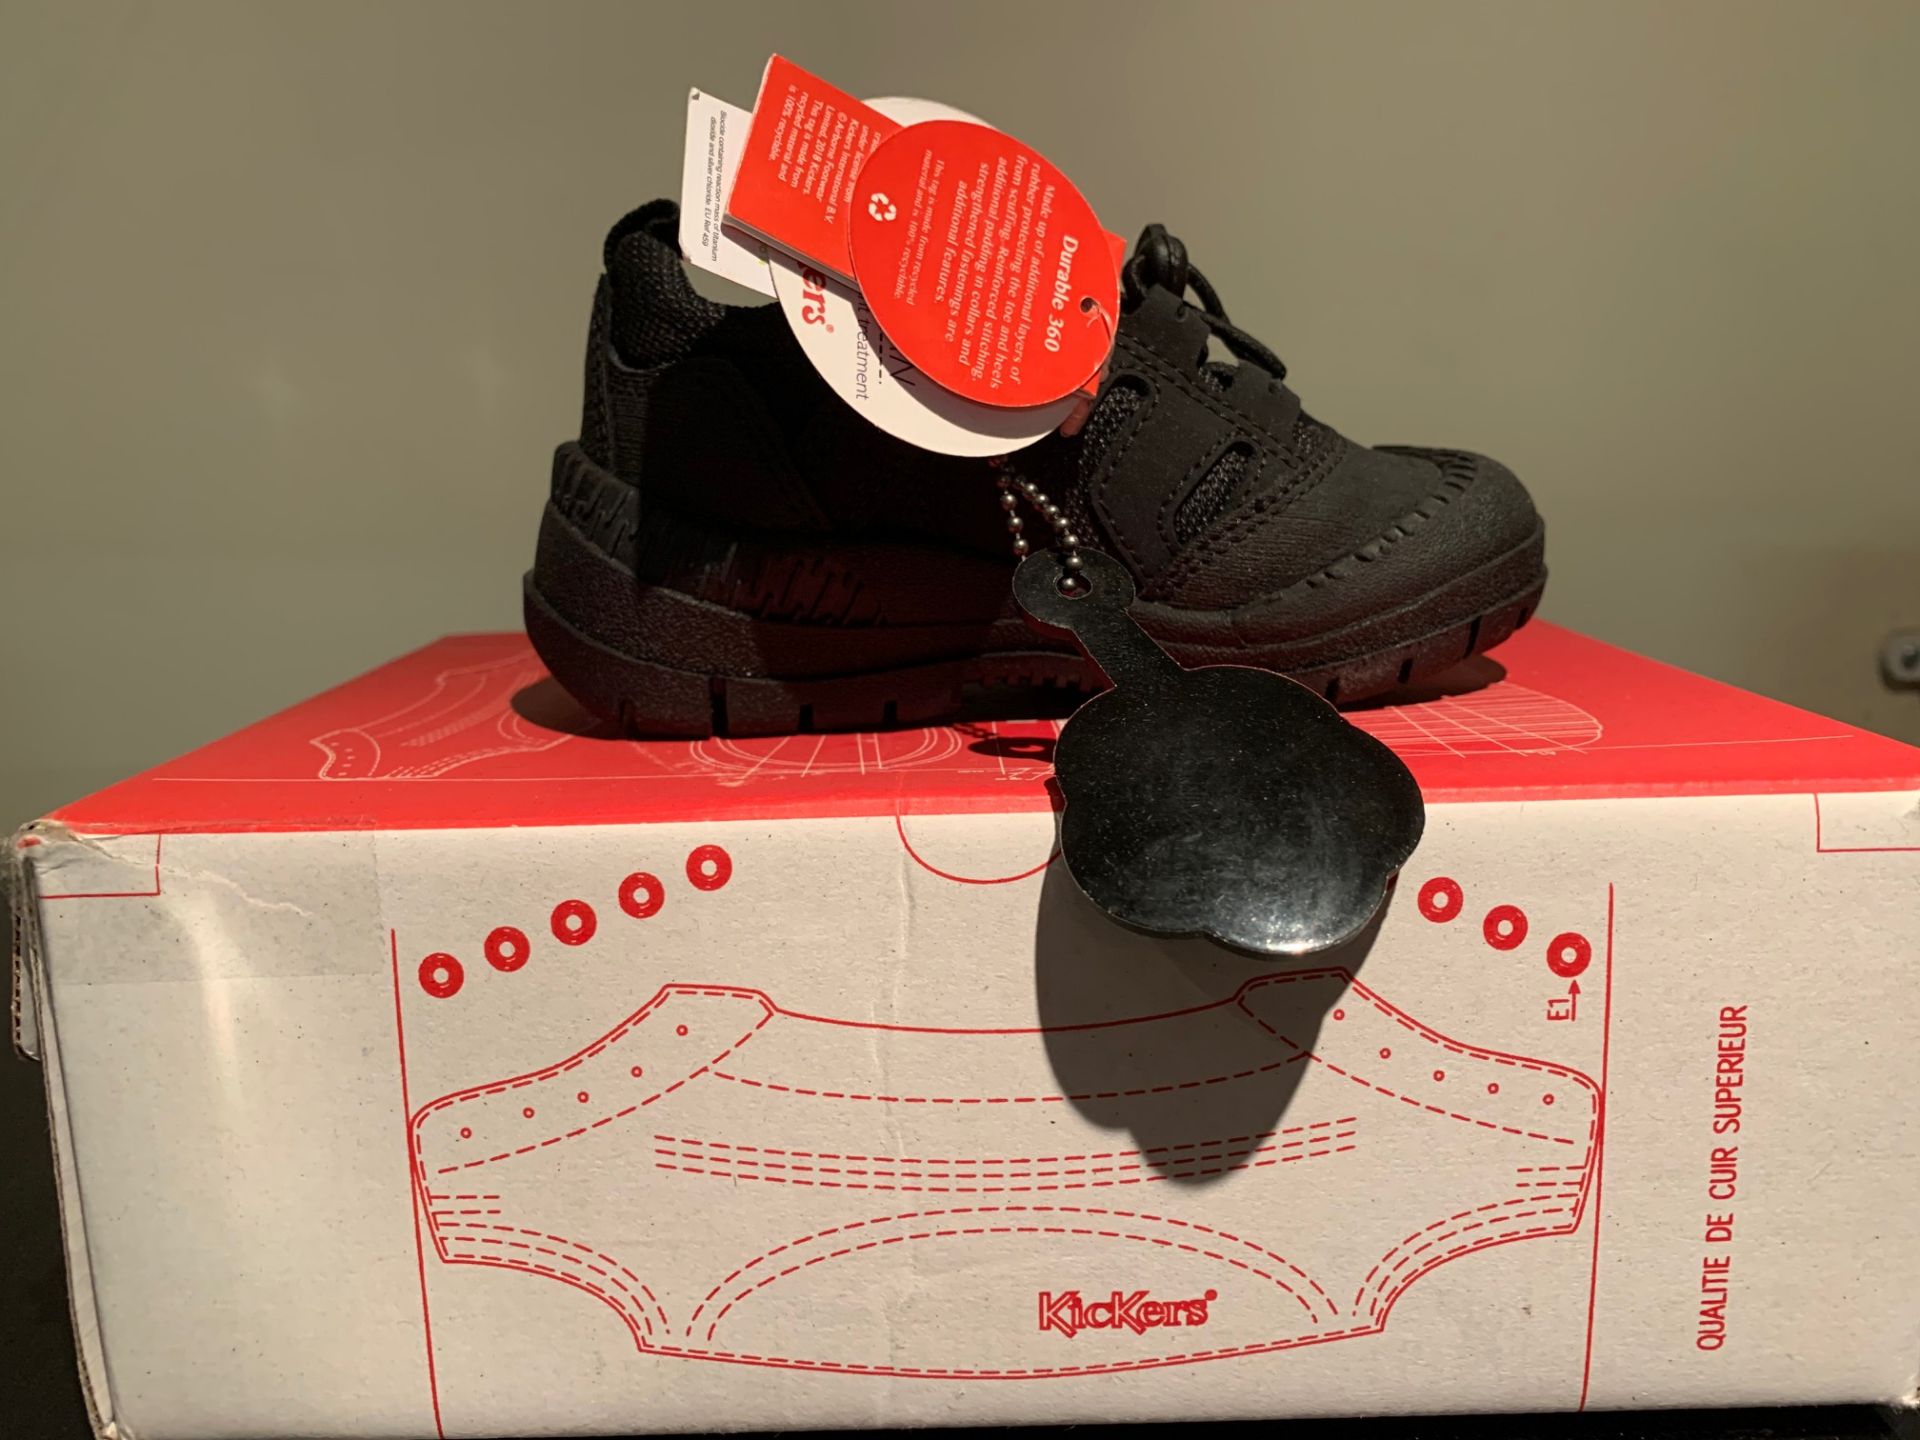 NEW & BOXED KICKER SHOE SIZE INFANT 5 (297 UPSTAIRS)